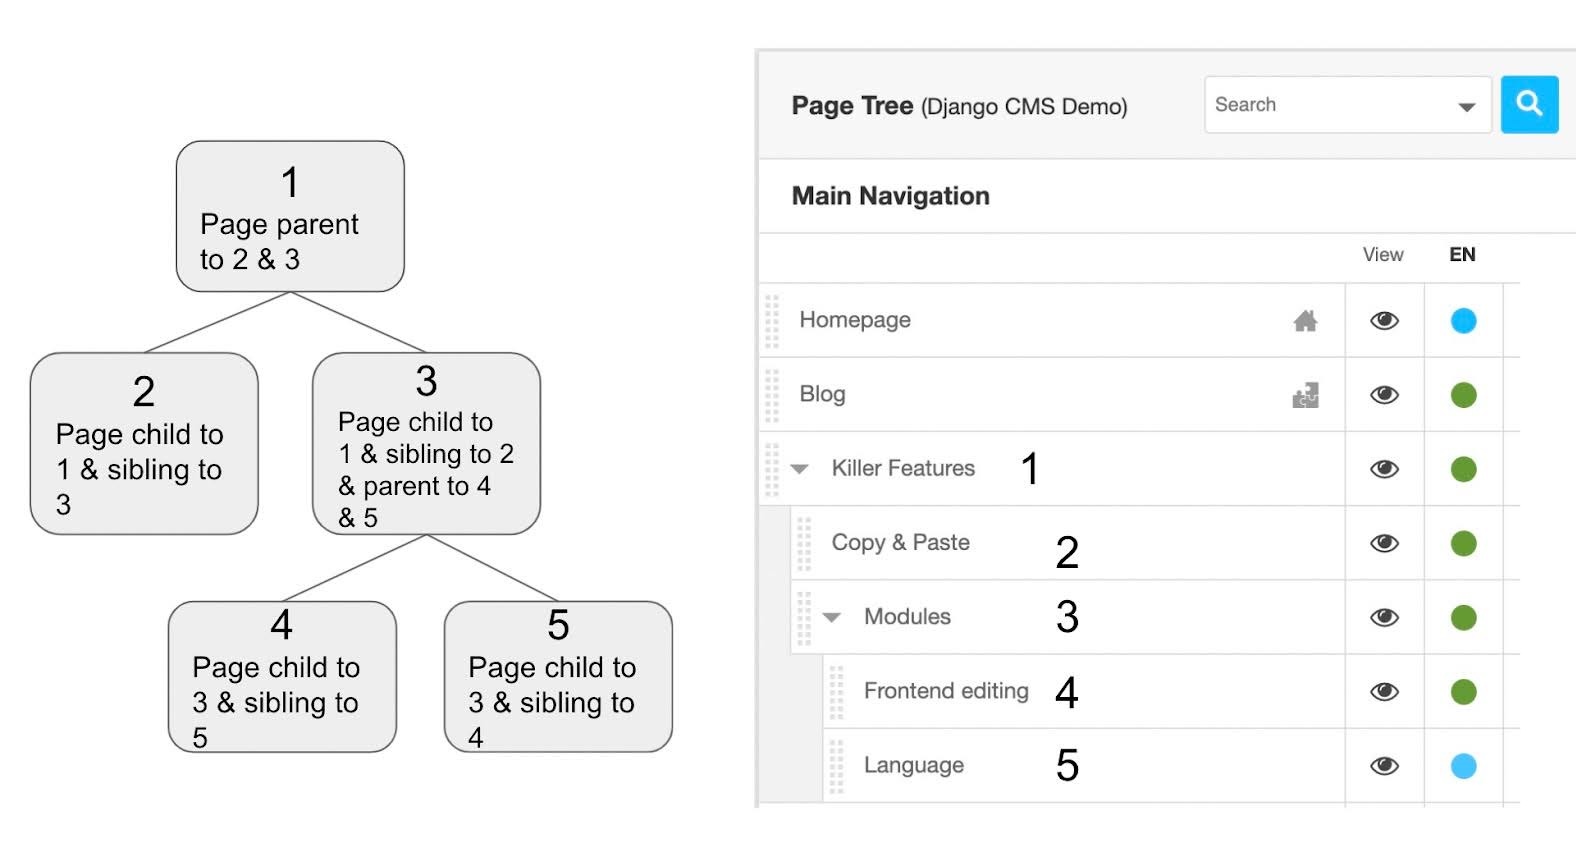 The page tree structure of django CMS